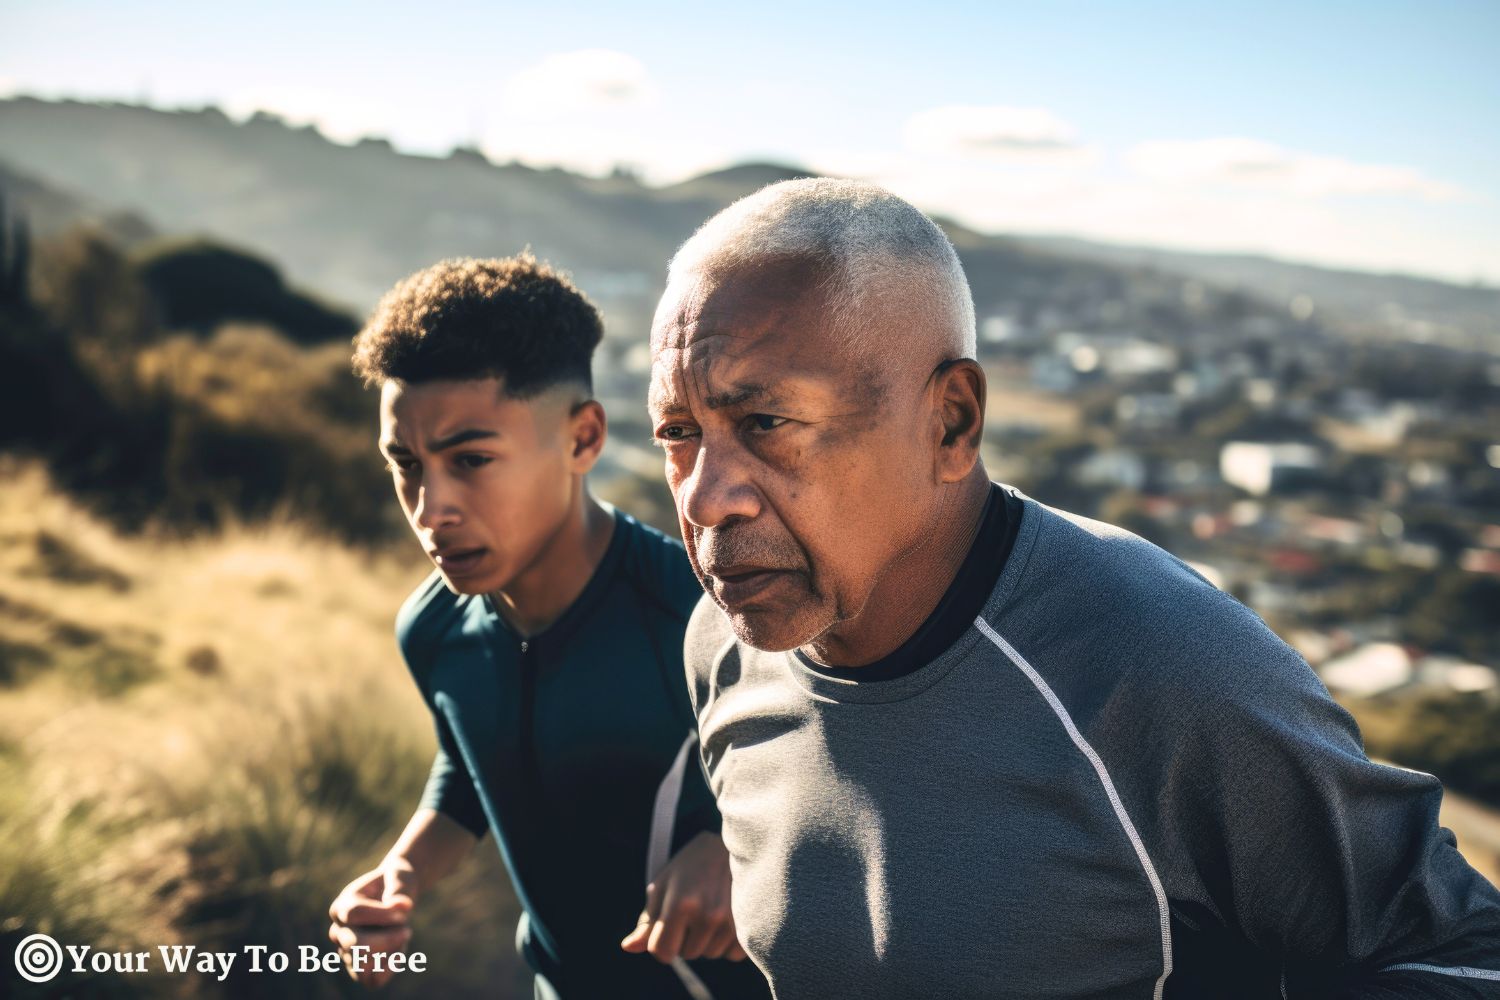 A grandchild boy and his grandfather engaging in a fitness activity, jogging outdoors. Spending time together. Commitment to health and well-being. Fitness journey